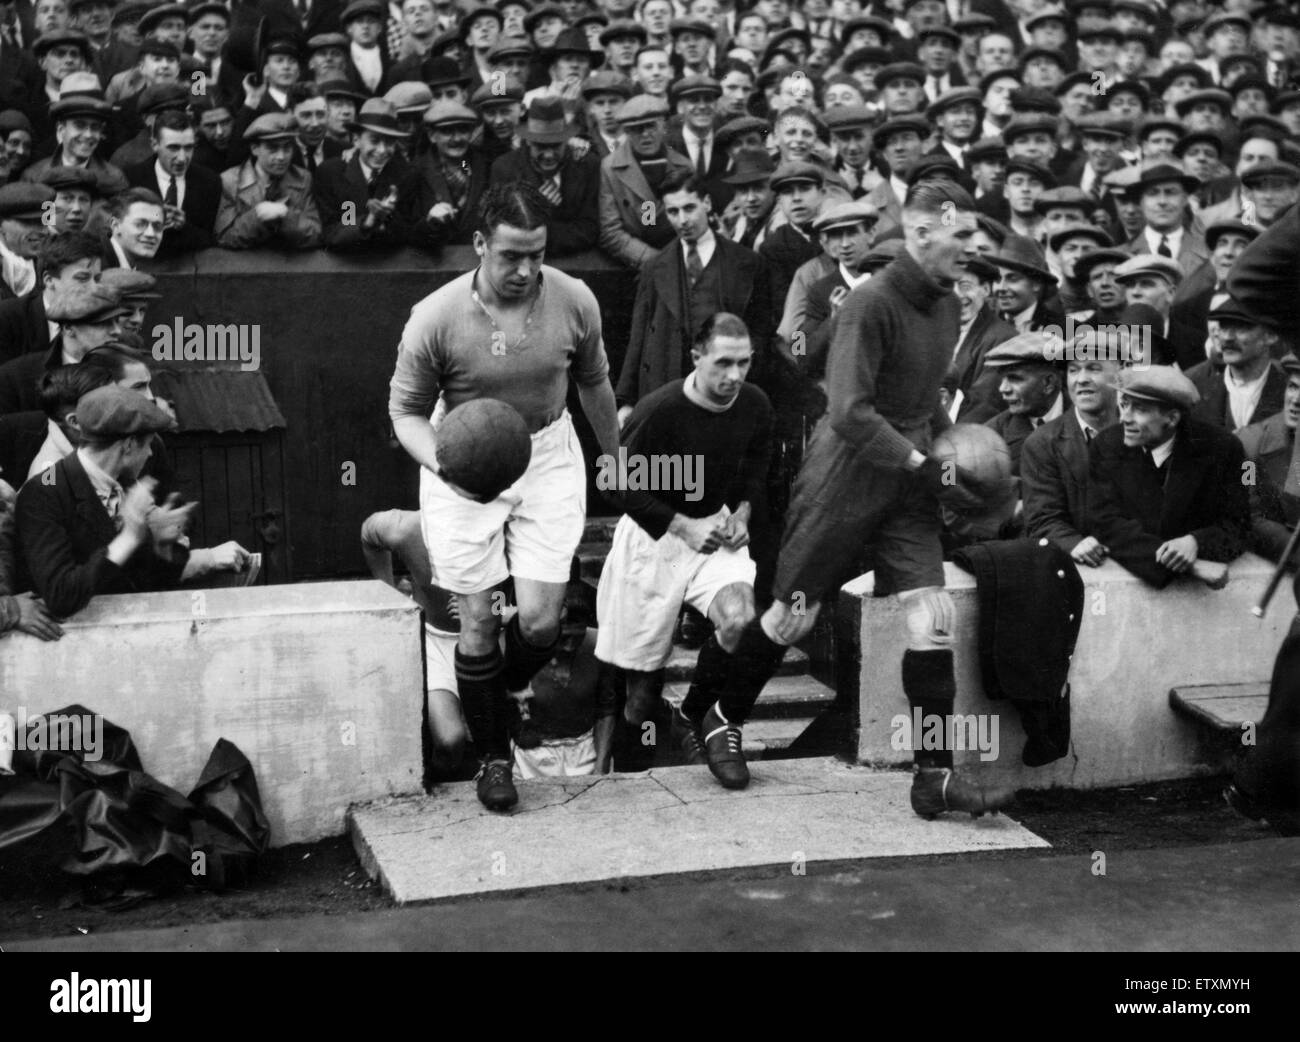 English League Division One match between Merseyside rivals Liverpool and Everton. Everton captain  William 'Dixie' Dean walks out on to the pitch with his rival Elisha Scott, goalkeeper and captain of Liverpool, before the Merseyside derby match. Circa 1 Stock Photo